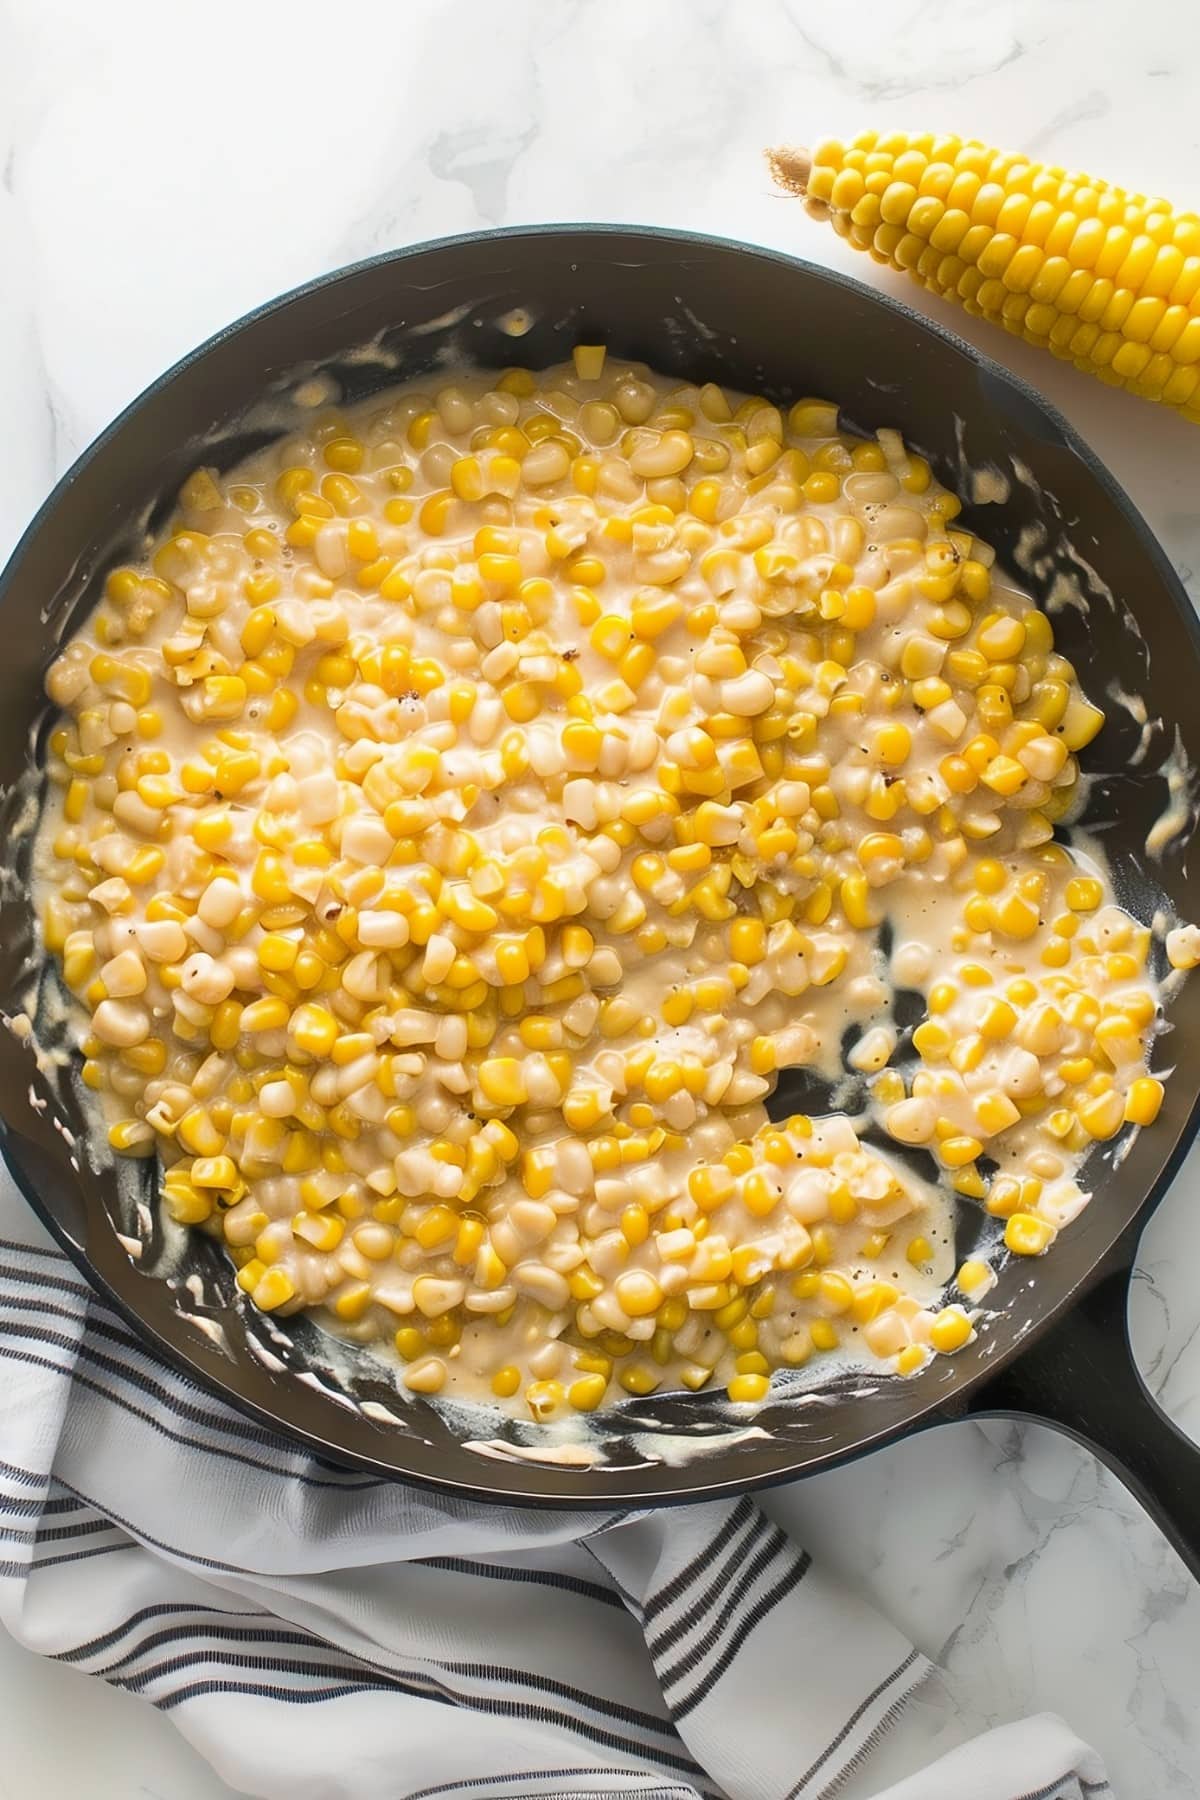 Mouthwatering corn skillet infused with the rich flavors of honey and butter, ready to be enjoyed as a comforting side dish